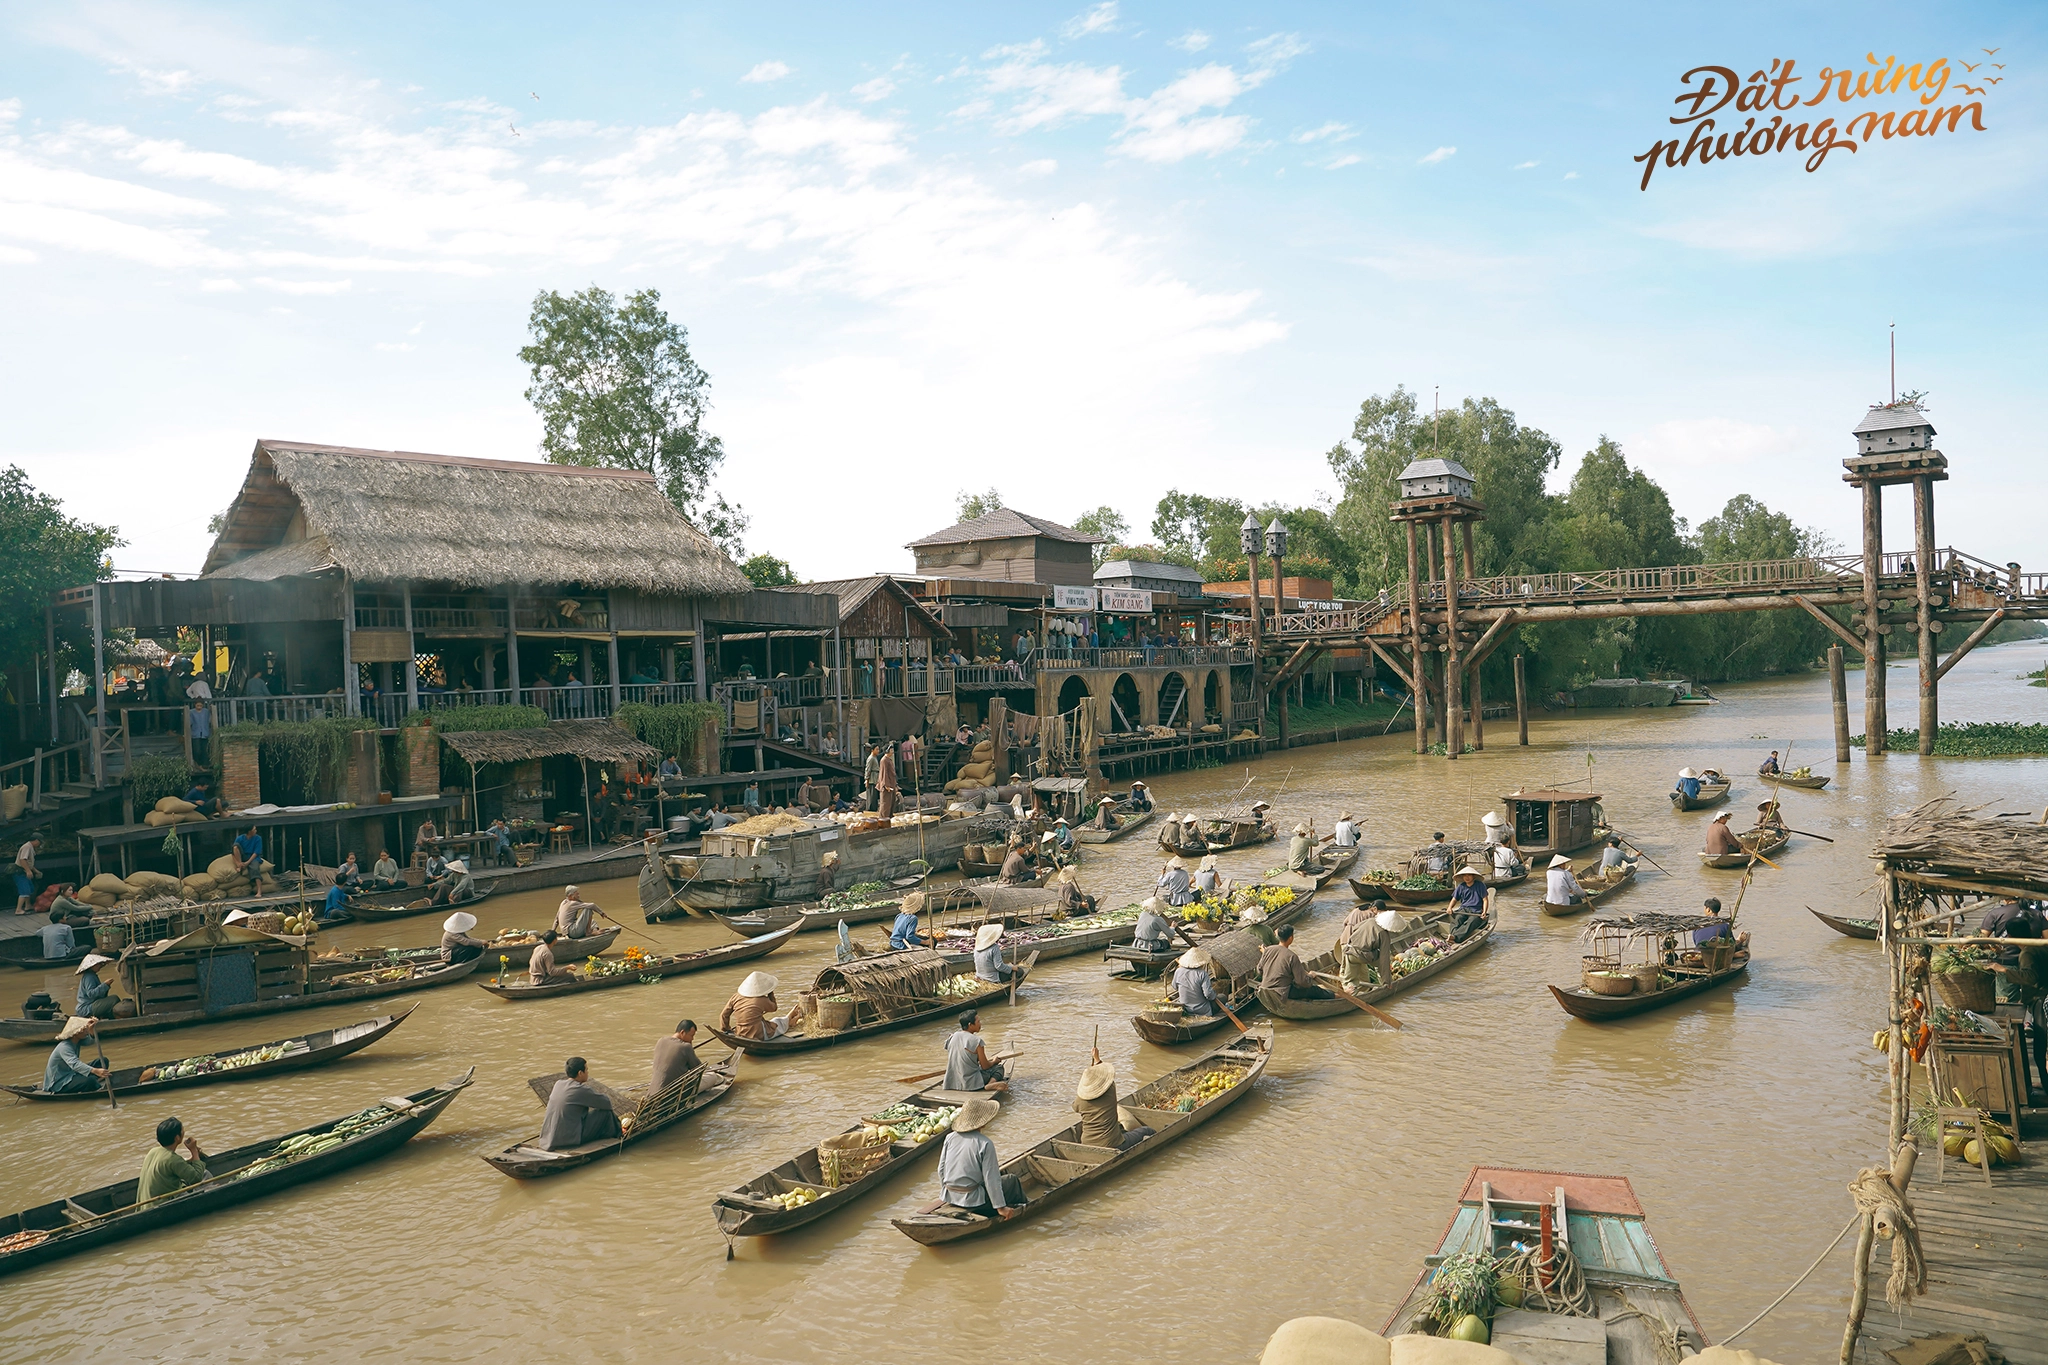 A floating market in Mekong Delta region featured in 'Dat Rung Phuong nam.'